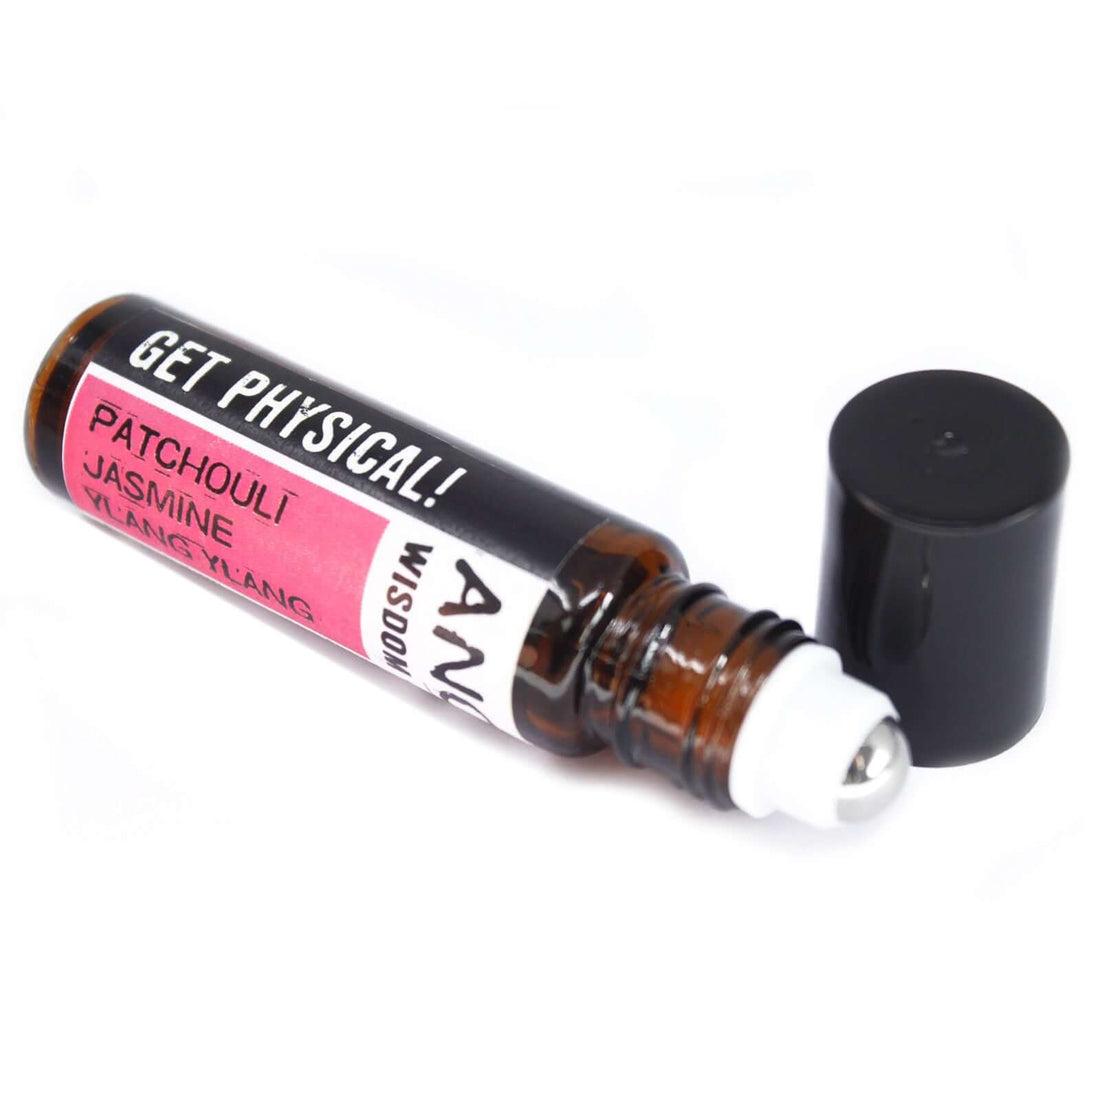 Roll on Essential Oil Blend - Get Physical!